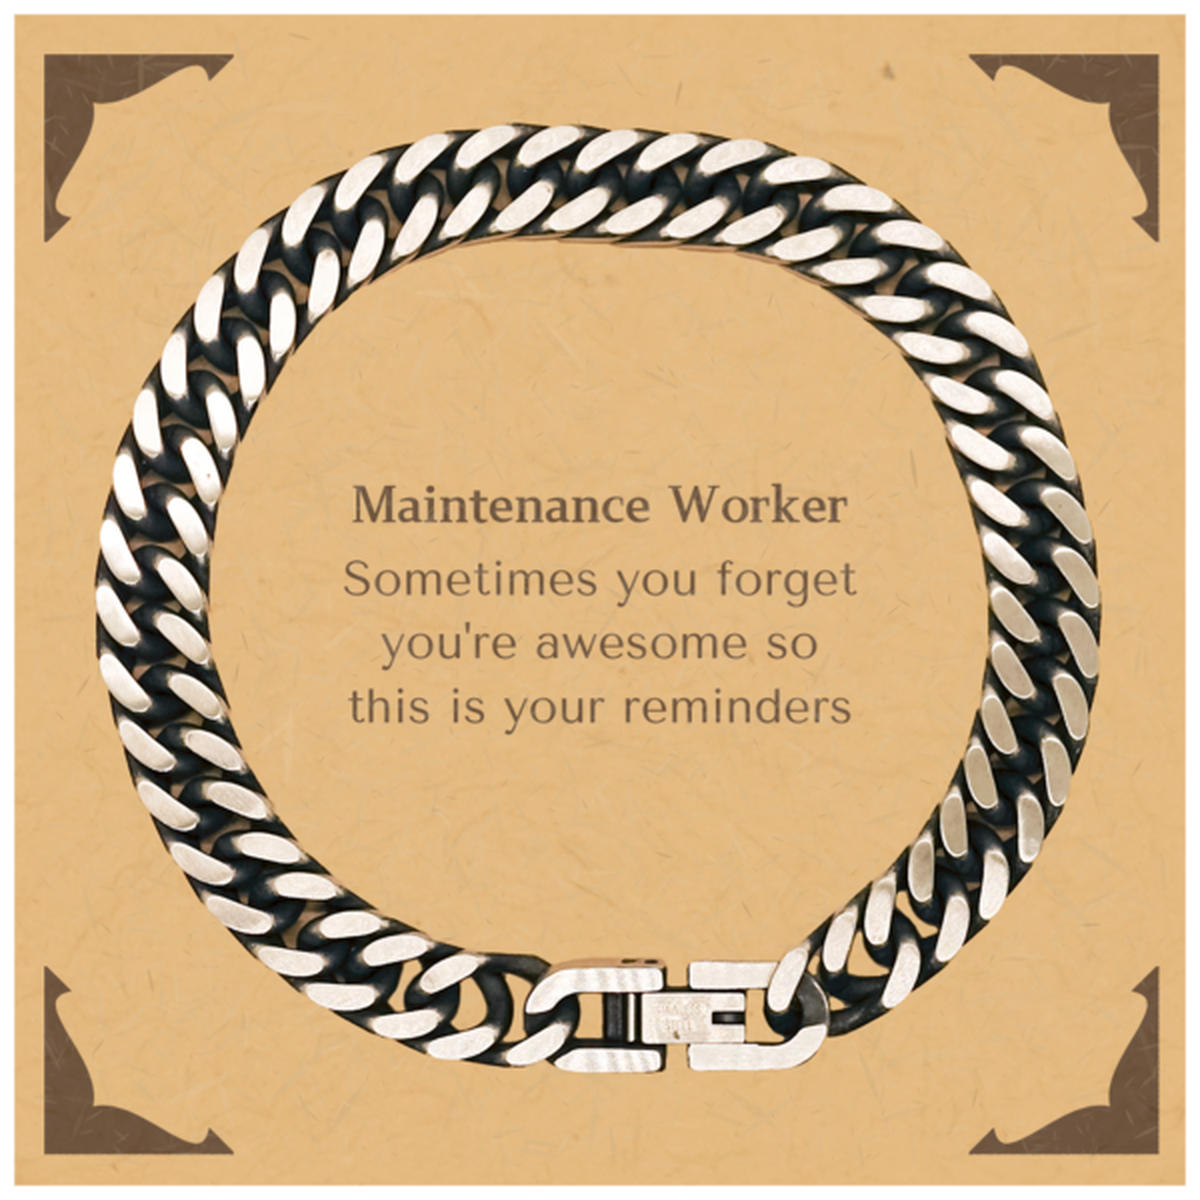 Sentimental Maintenance Worker Cuban Link Chain Bracelet, Maintenance Worker Sometimes you forget you're awesome so this is your reminders, Graduation Christmas Birthday Gifts for Maintenance Worker, Men, Women, Coworkers